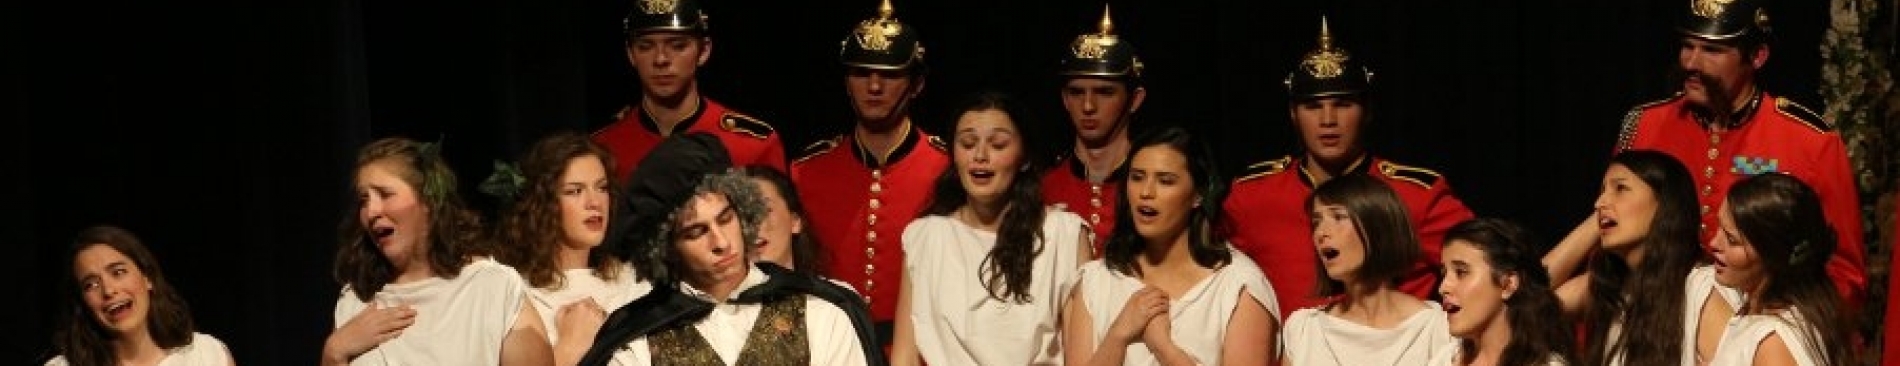 Video: Students Perform Gilbert & Sullivan’s “In a Doleful T